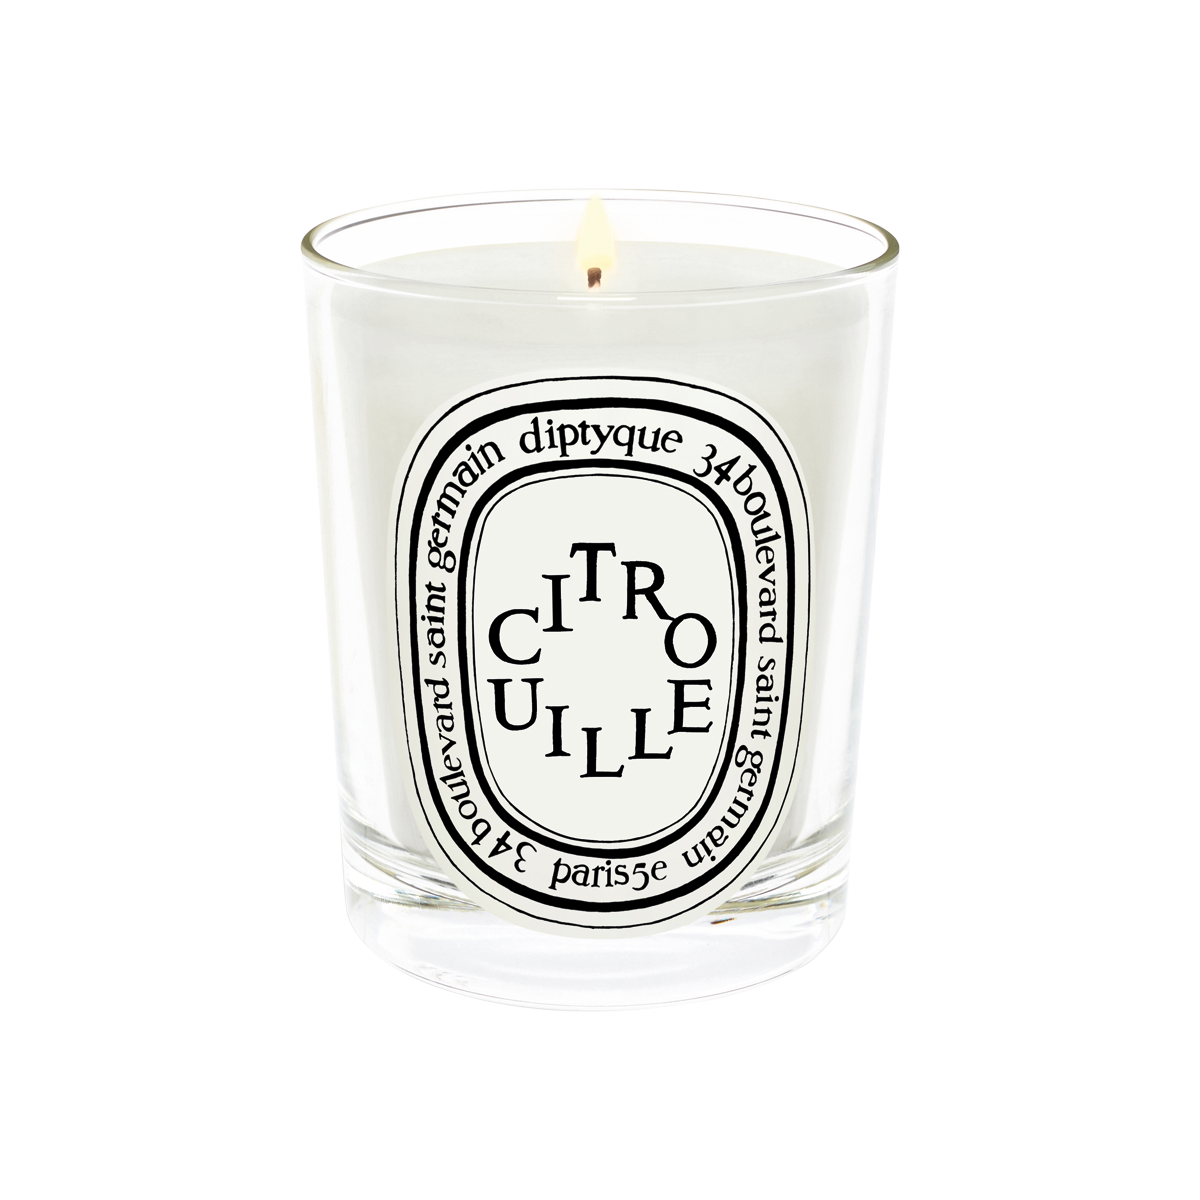 Diptyque - Citrouille Scented Candle